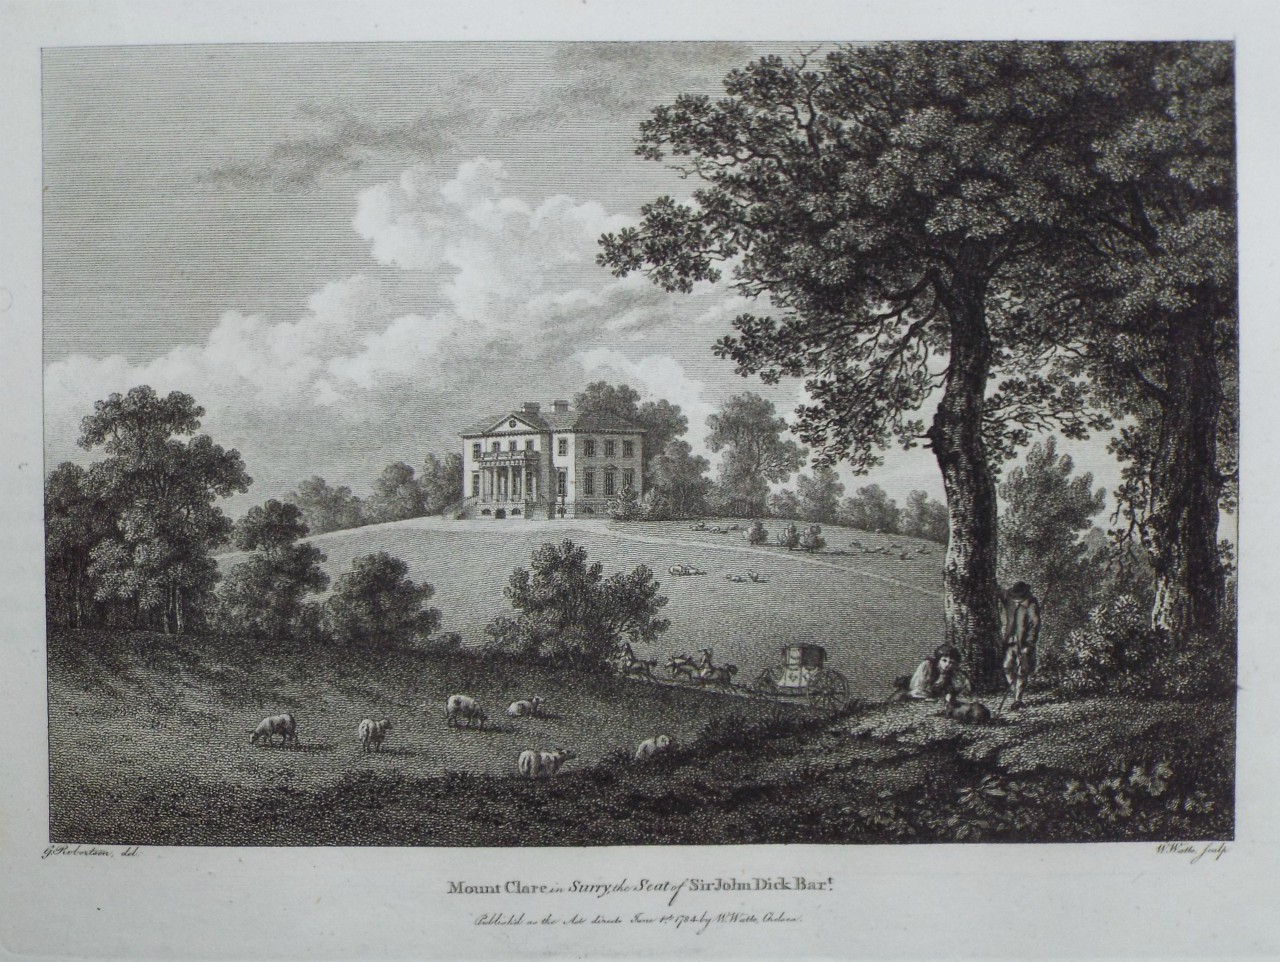 Print - Mount Clare in Surry, the Seat of Sir John Dick Bart. - Watts